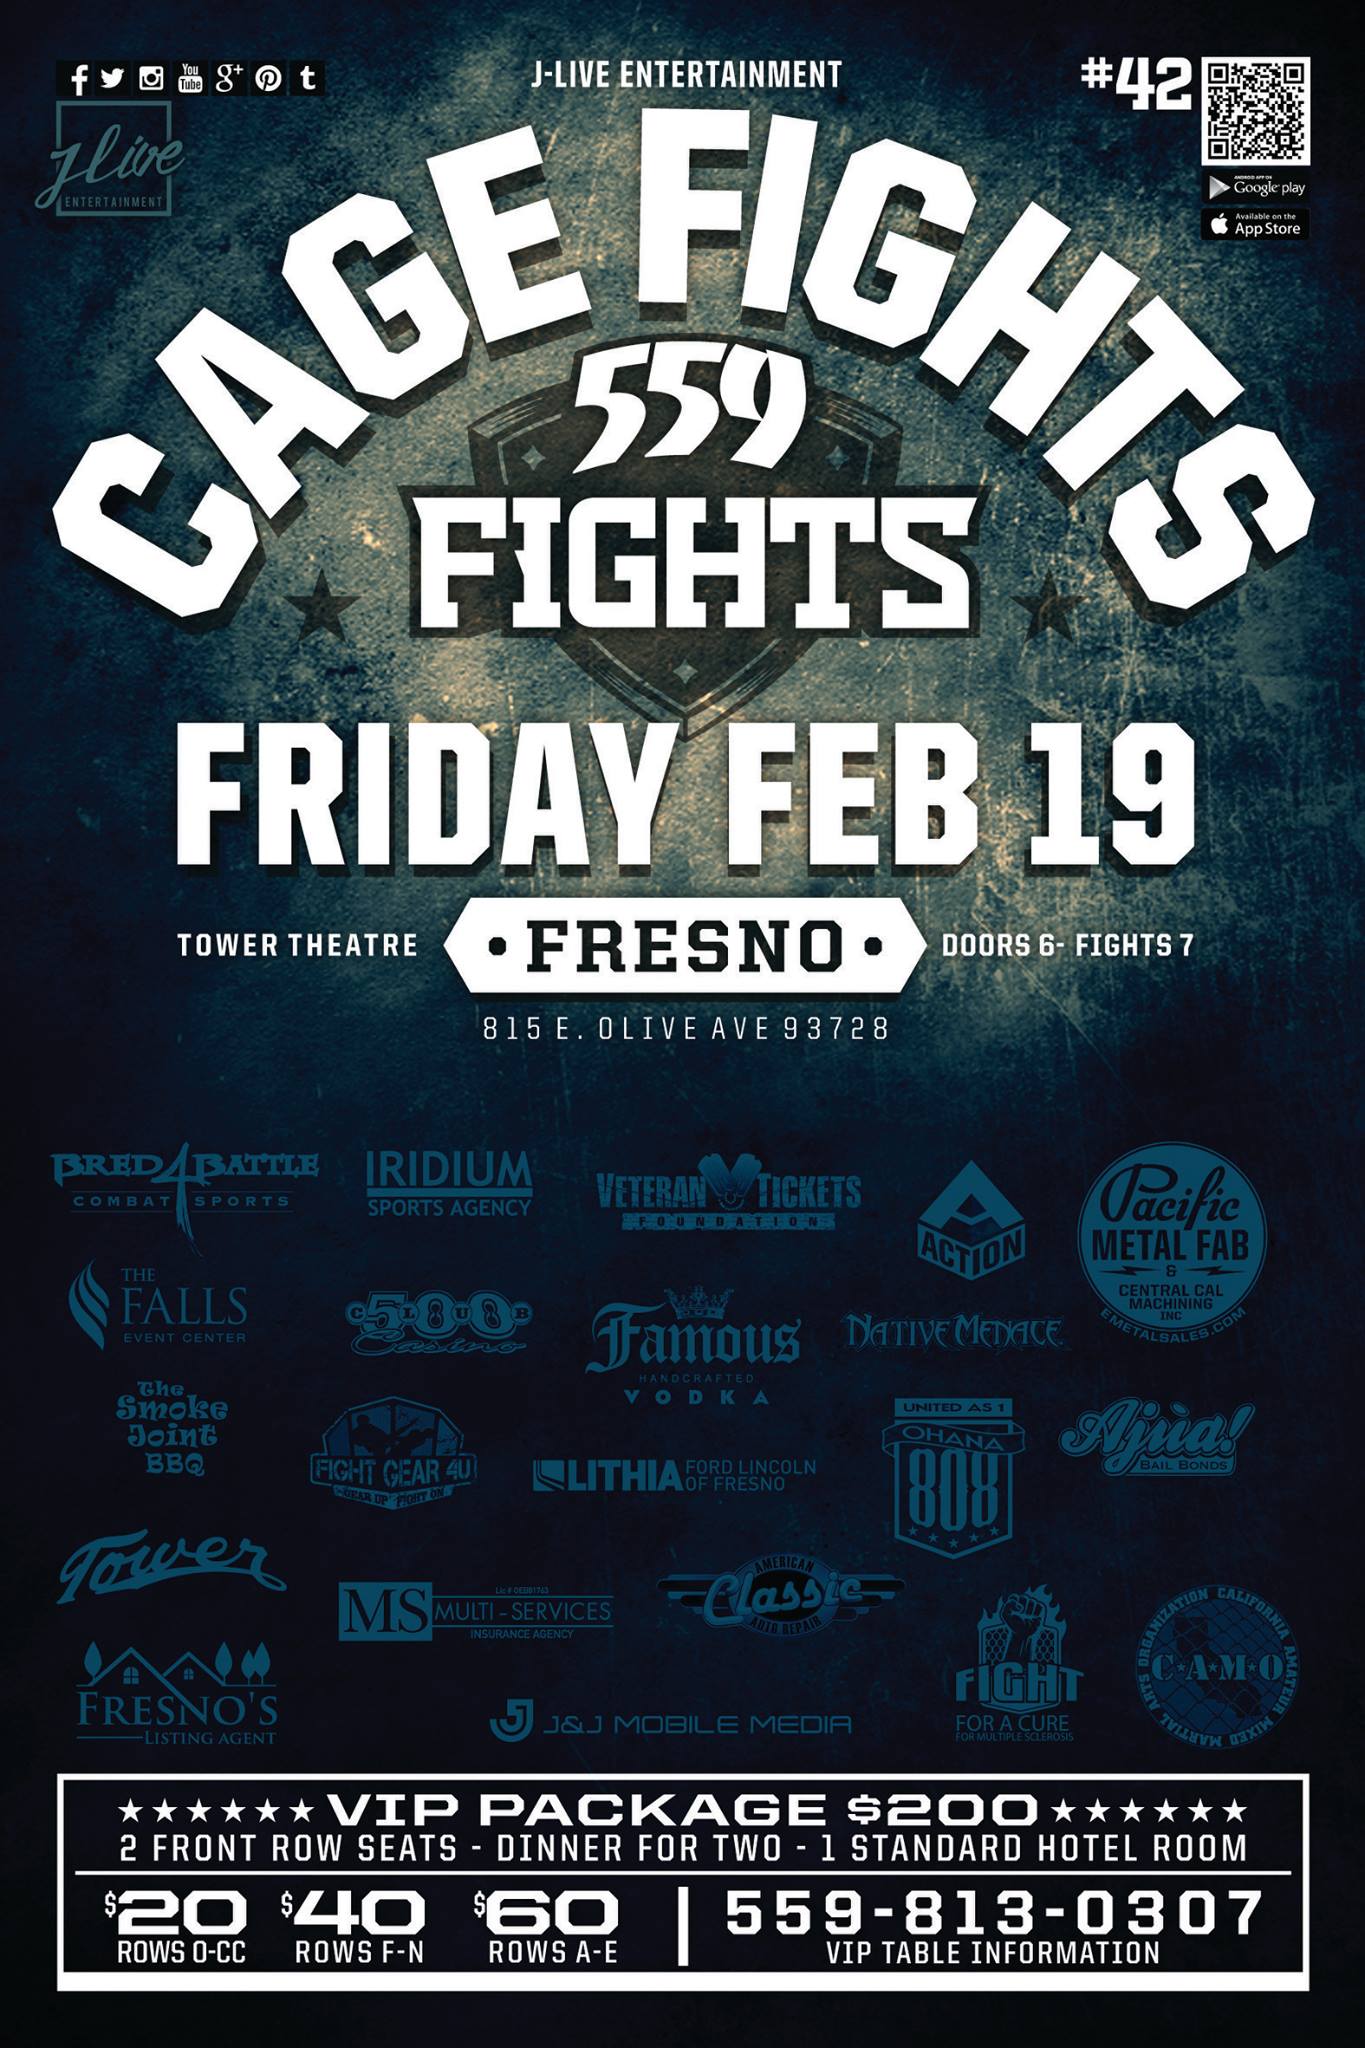 559 Fights Poster